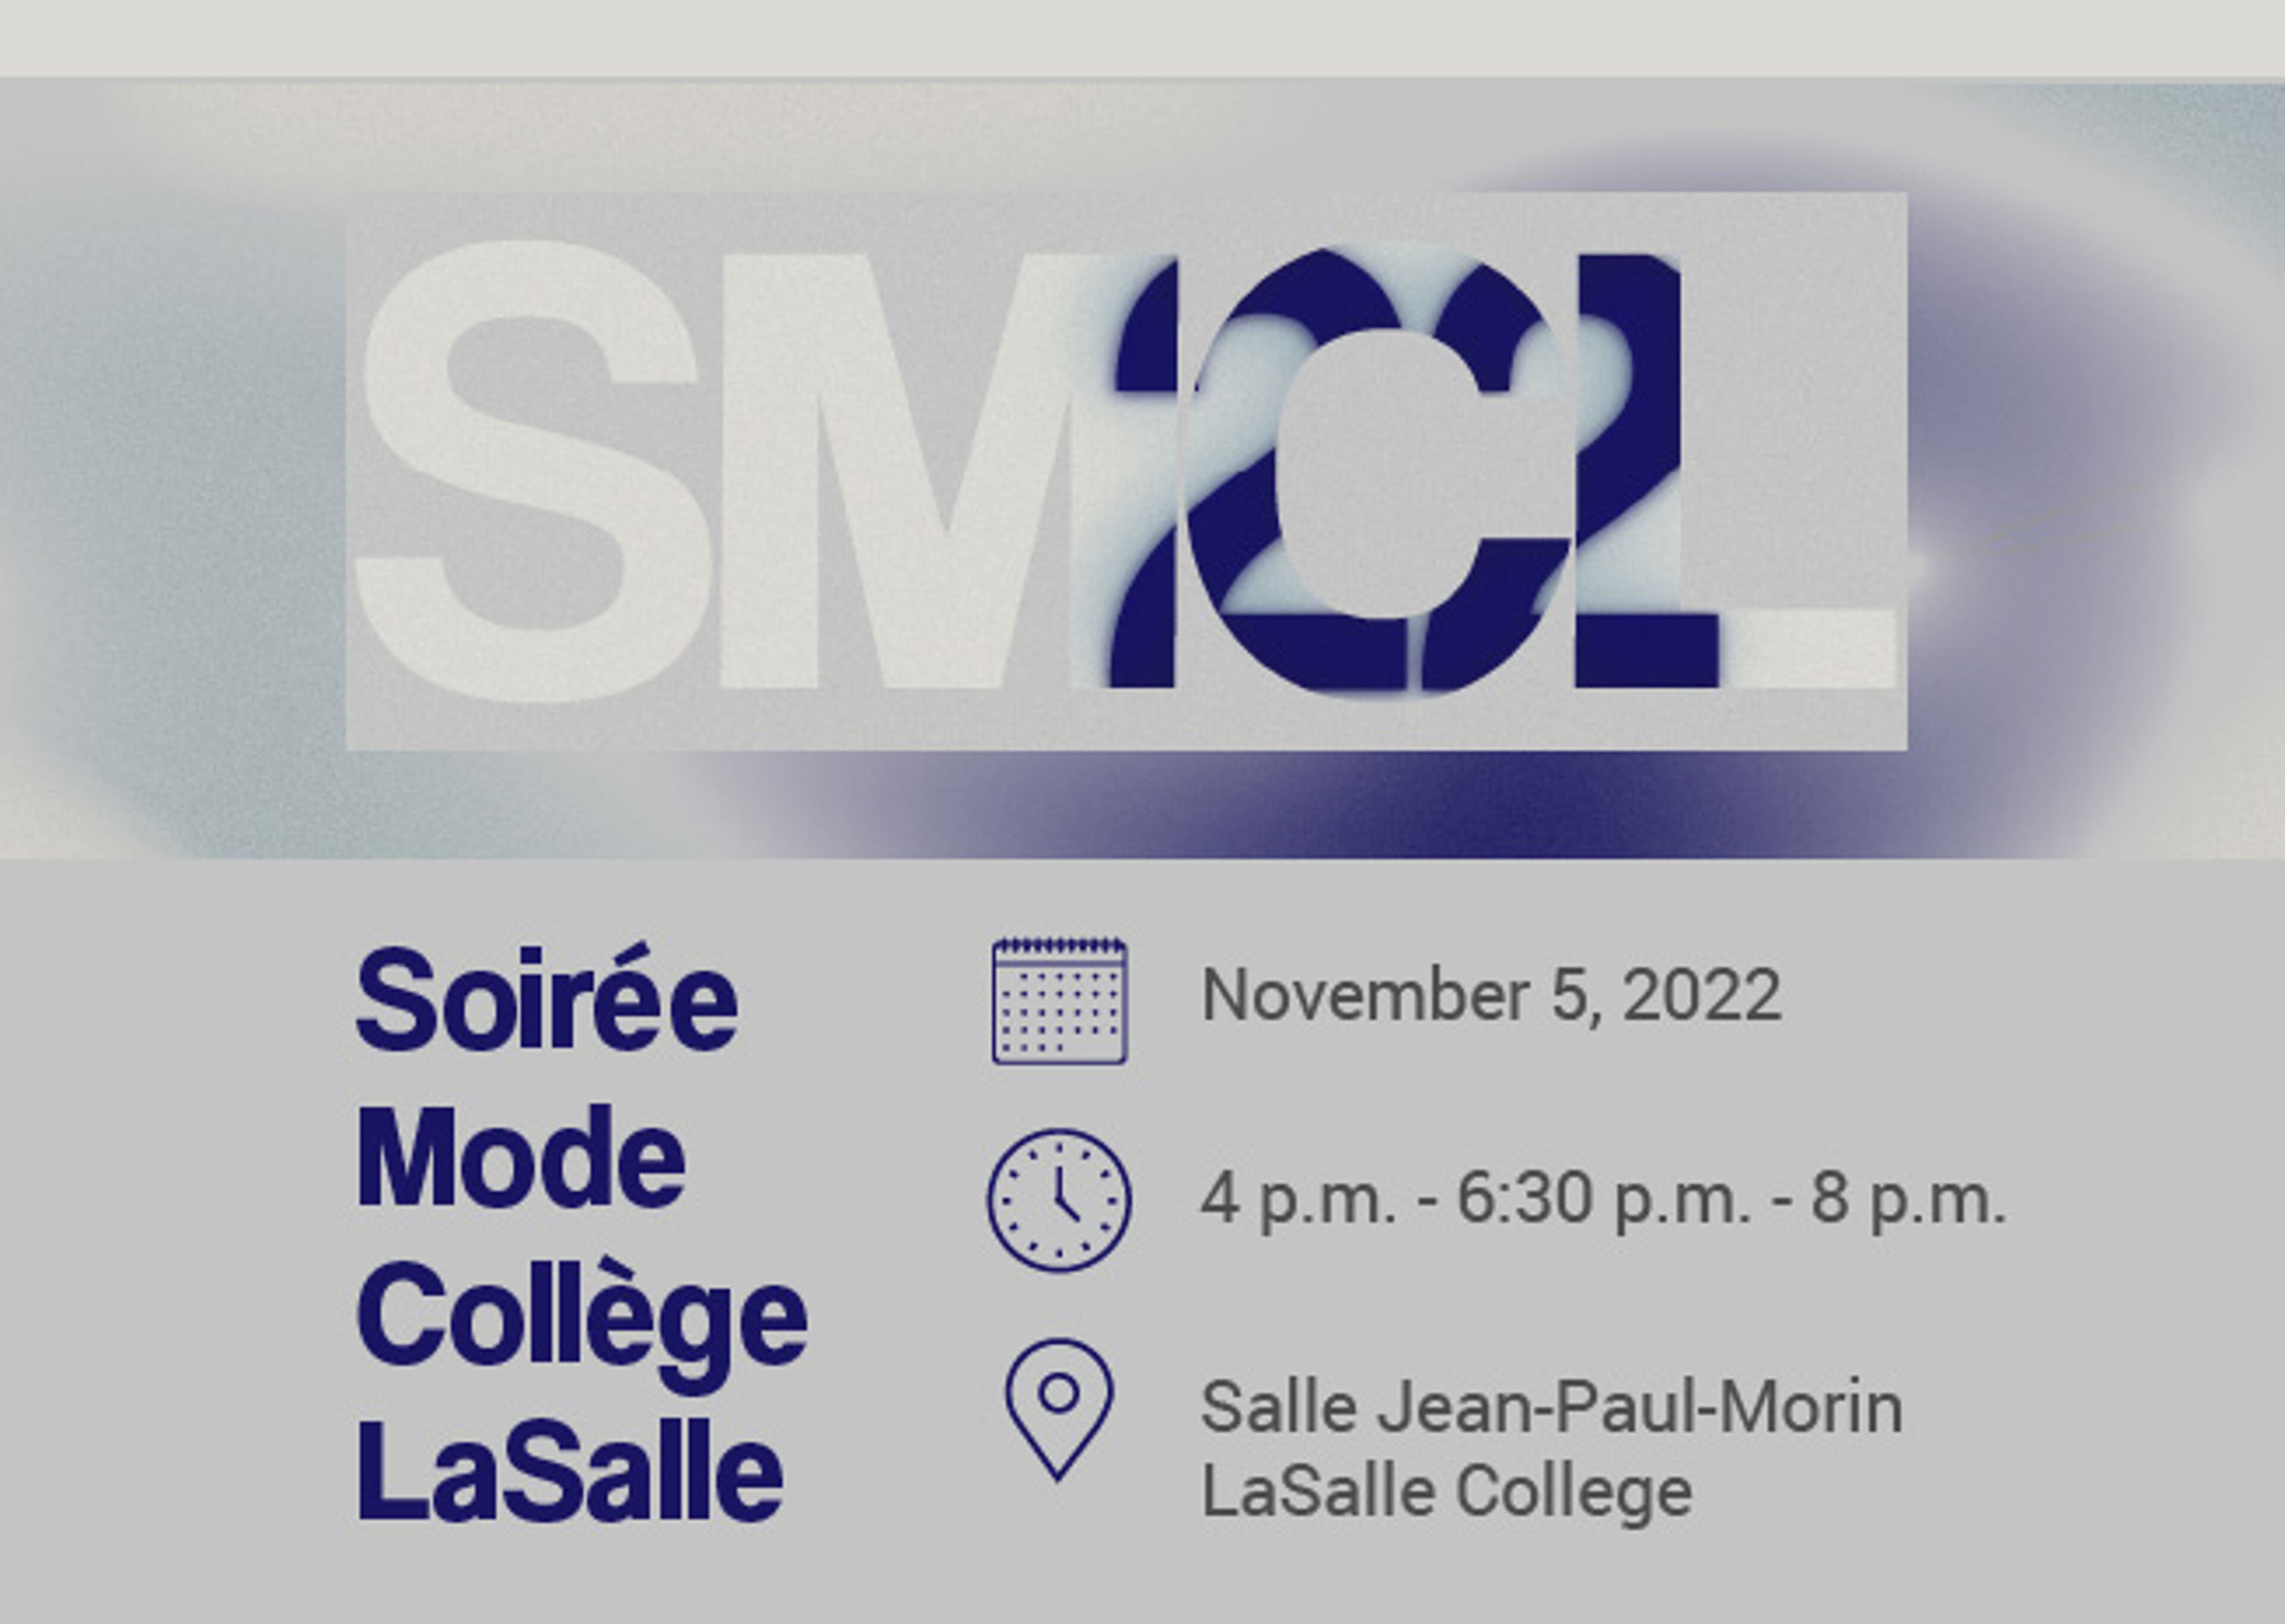 Invitation to the 'Soirée Mode Collège LaSalle' on November 5, 2022, from 4 p.m. to 8 p.m. at Salle Jean-Paul-Morin.